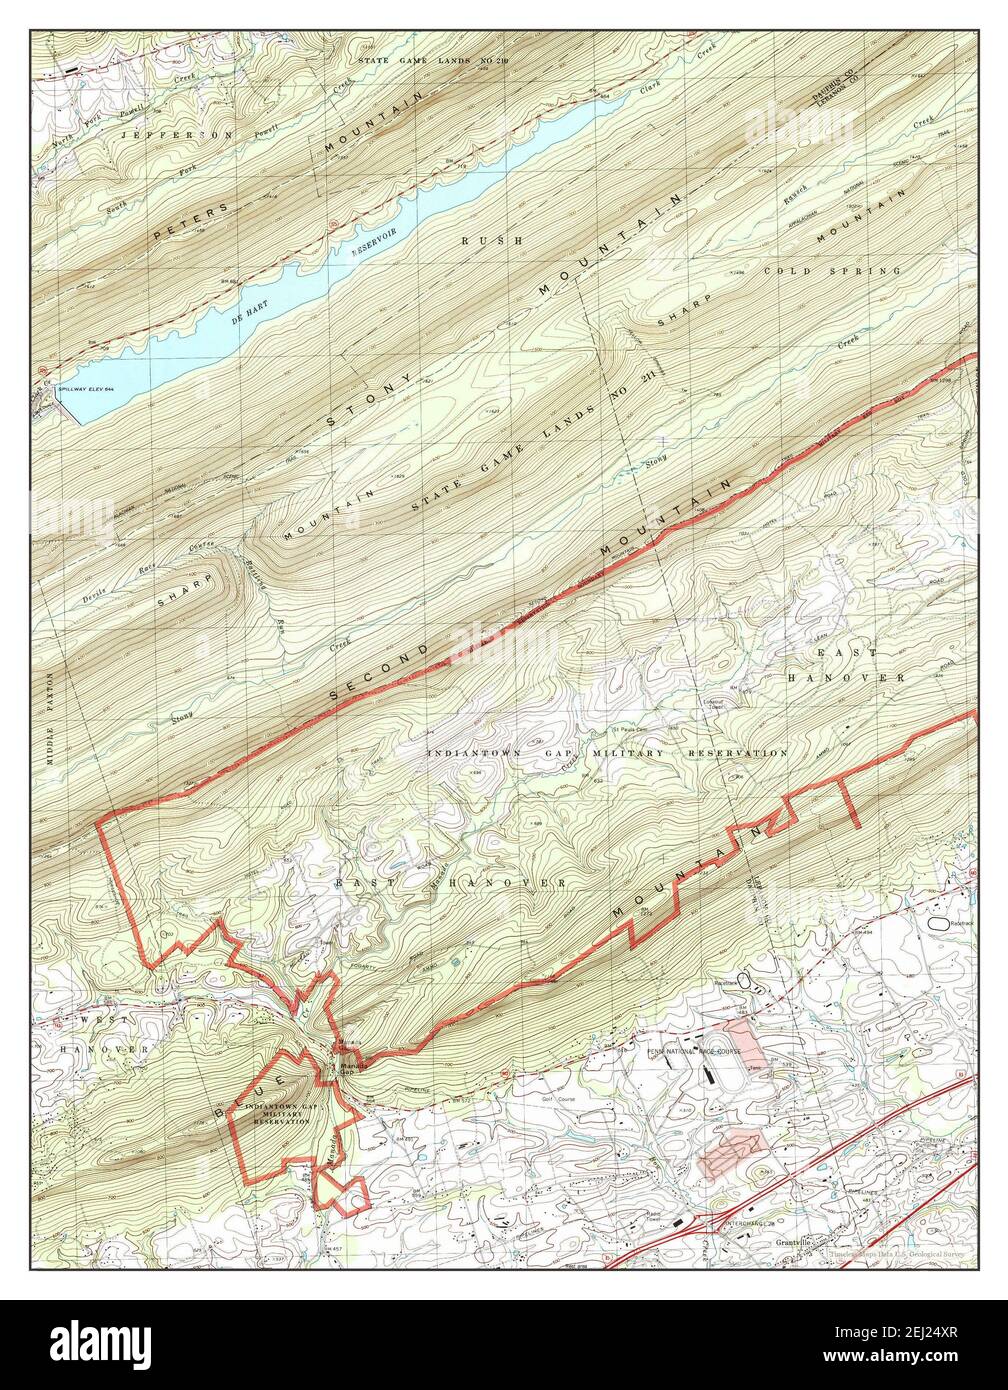 Grantville, Pennsylvania, map 1999, 1:24000, United States of America by Timeless Maps, data U.S. Geological Survey Stock Photo